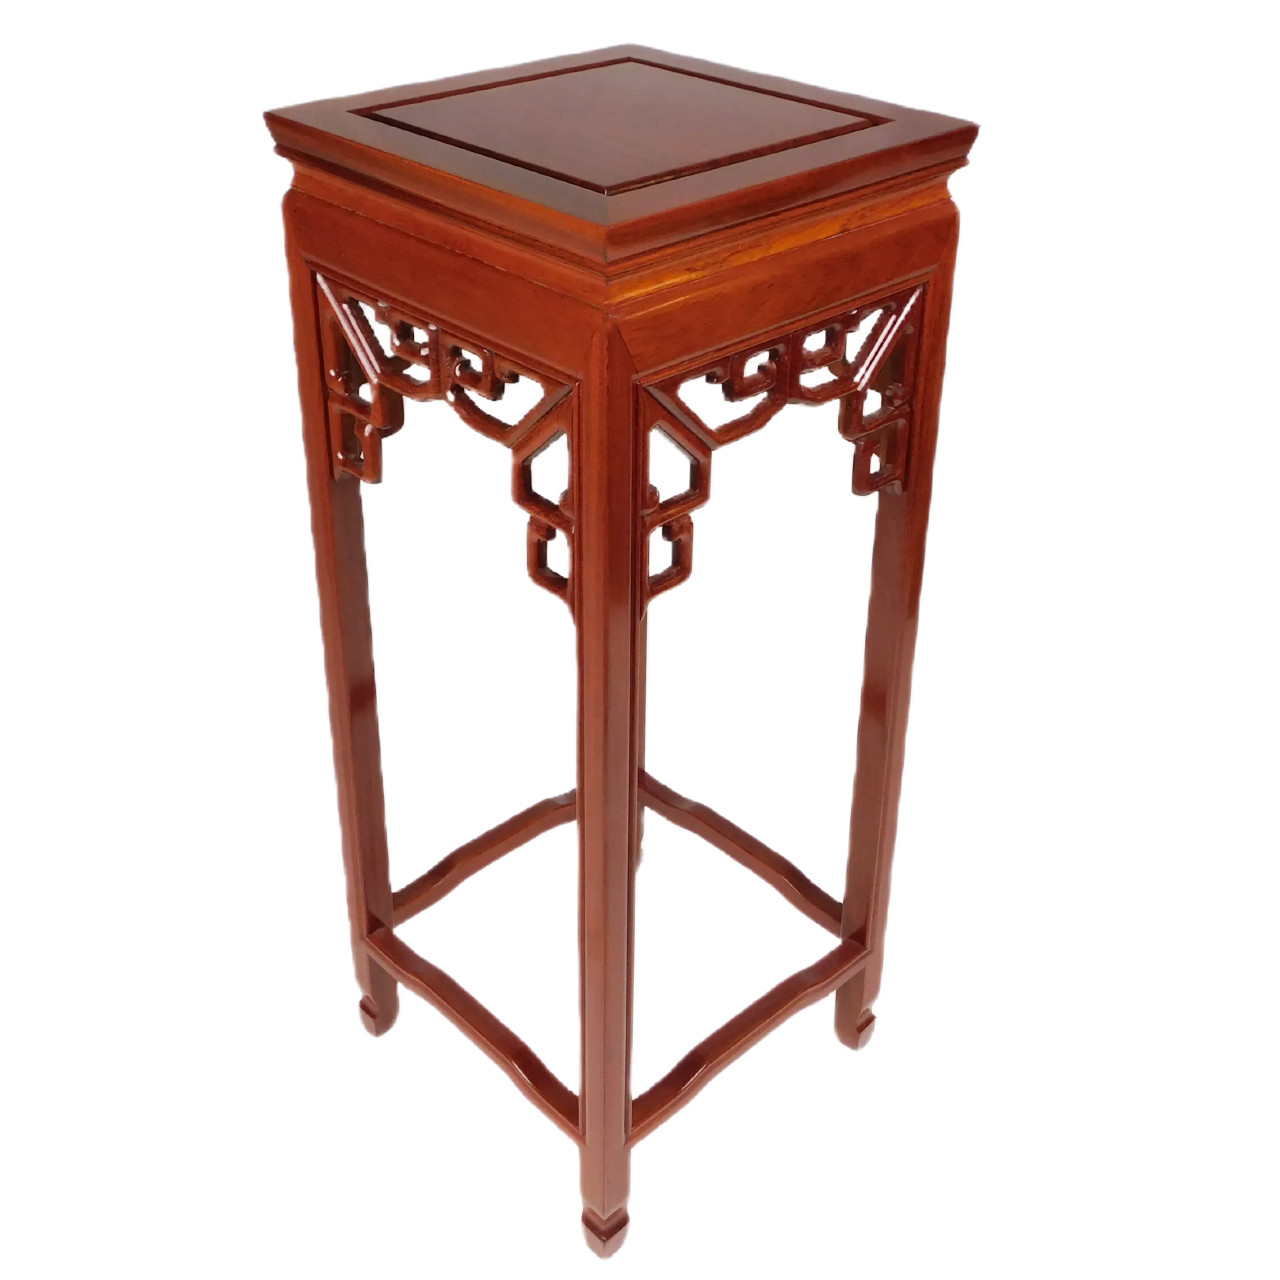 Wooden Plate Stand in Rosewood Stain - Oriental Furniture Warehouse:  Chinese & Asian Styles